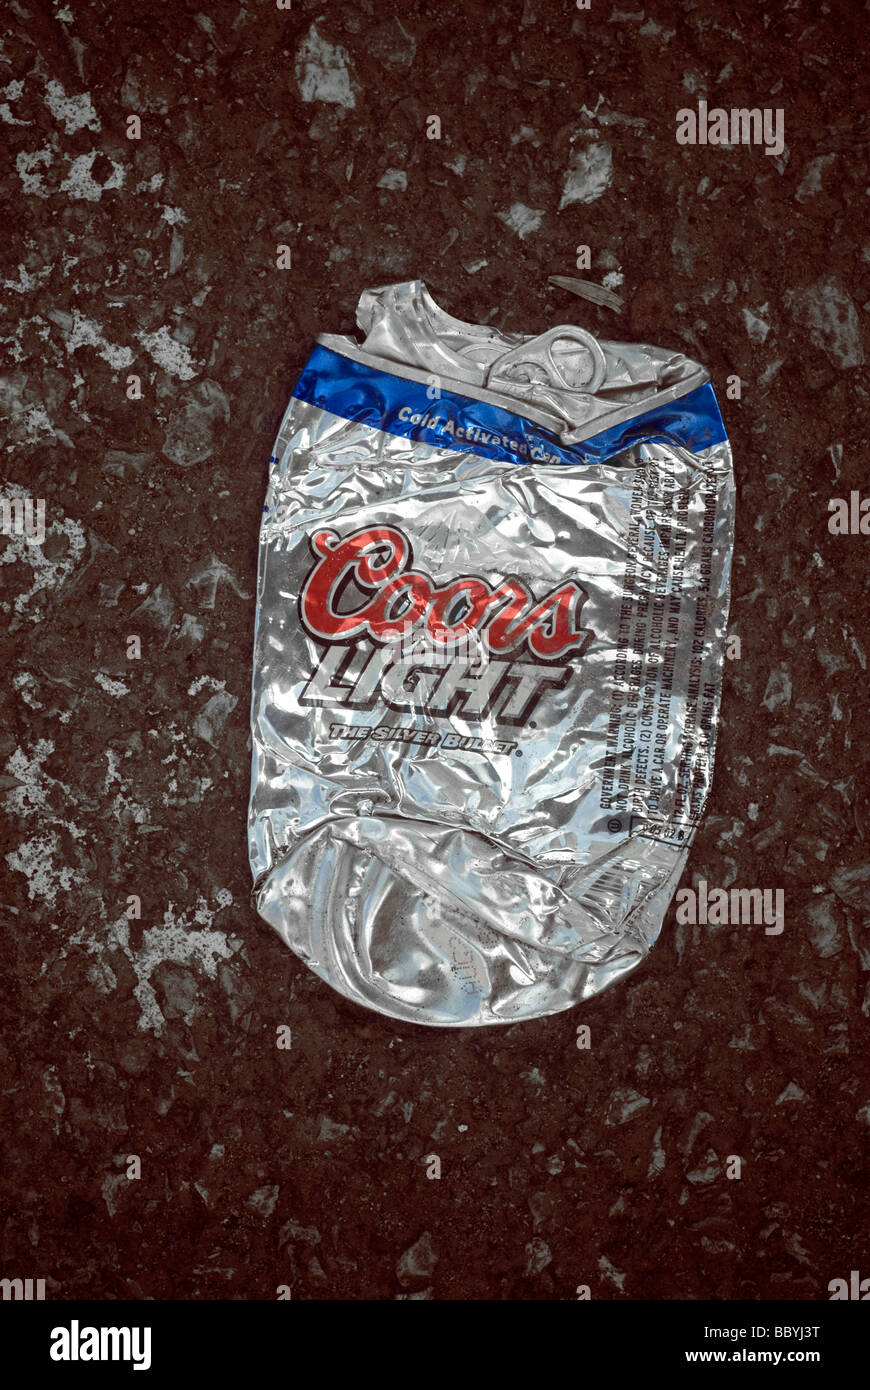 A crushed can of Coors Light beer is seen on the pavement on Sunday June 14 2009 Richard B Levine Stock Photo